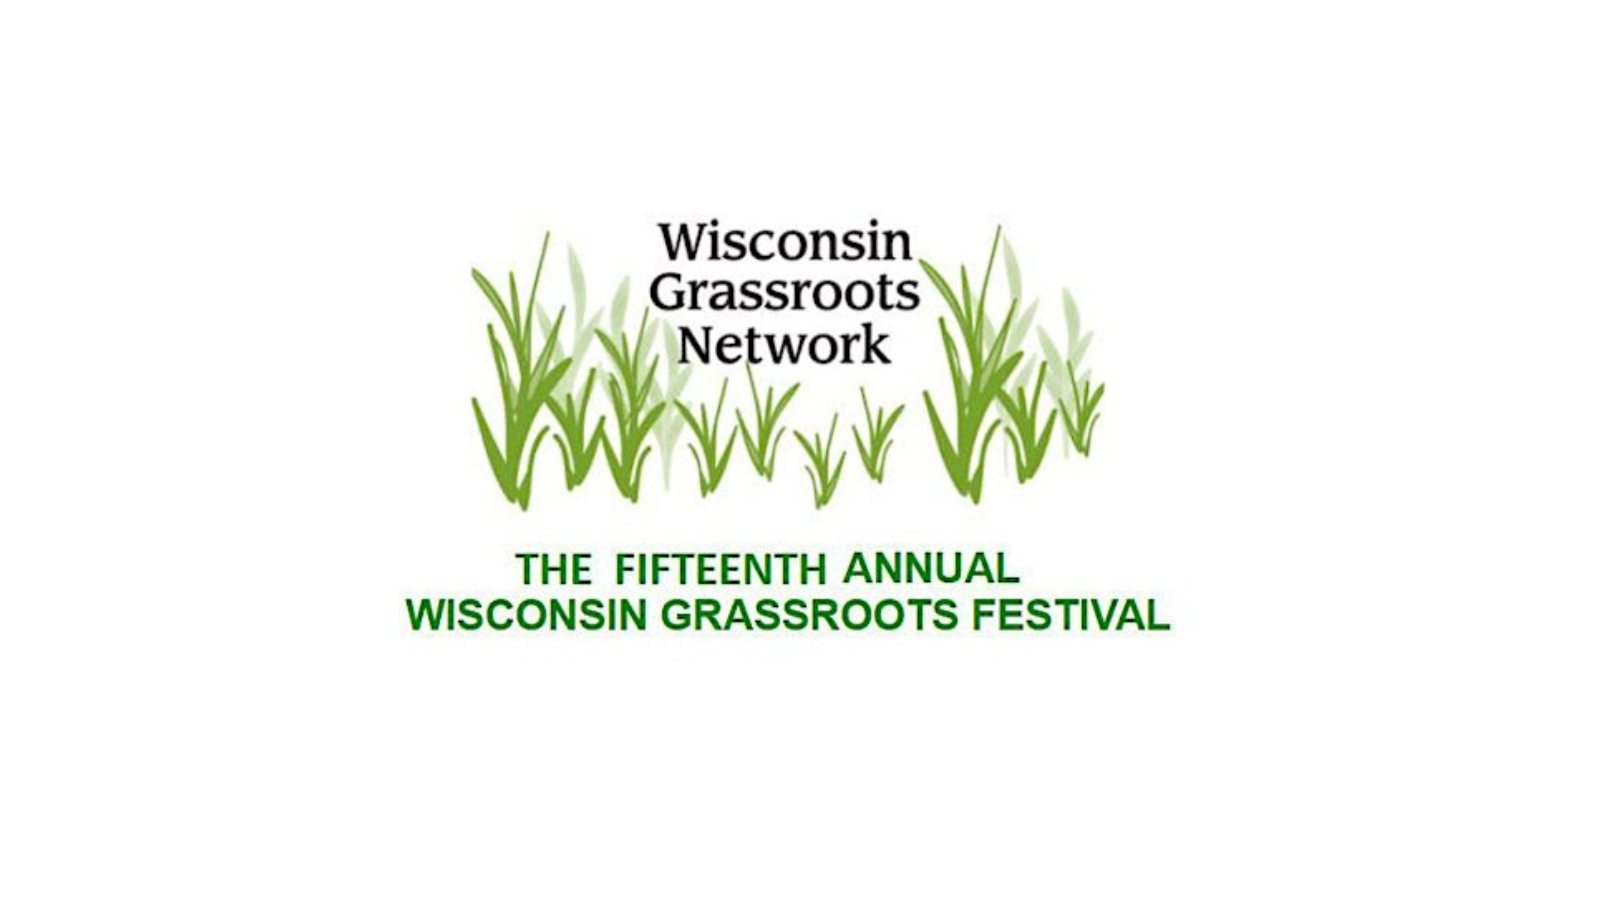 Wisconsin Grassroots Network holds festival in Appleton